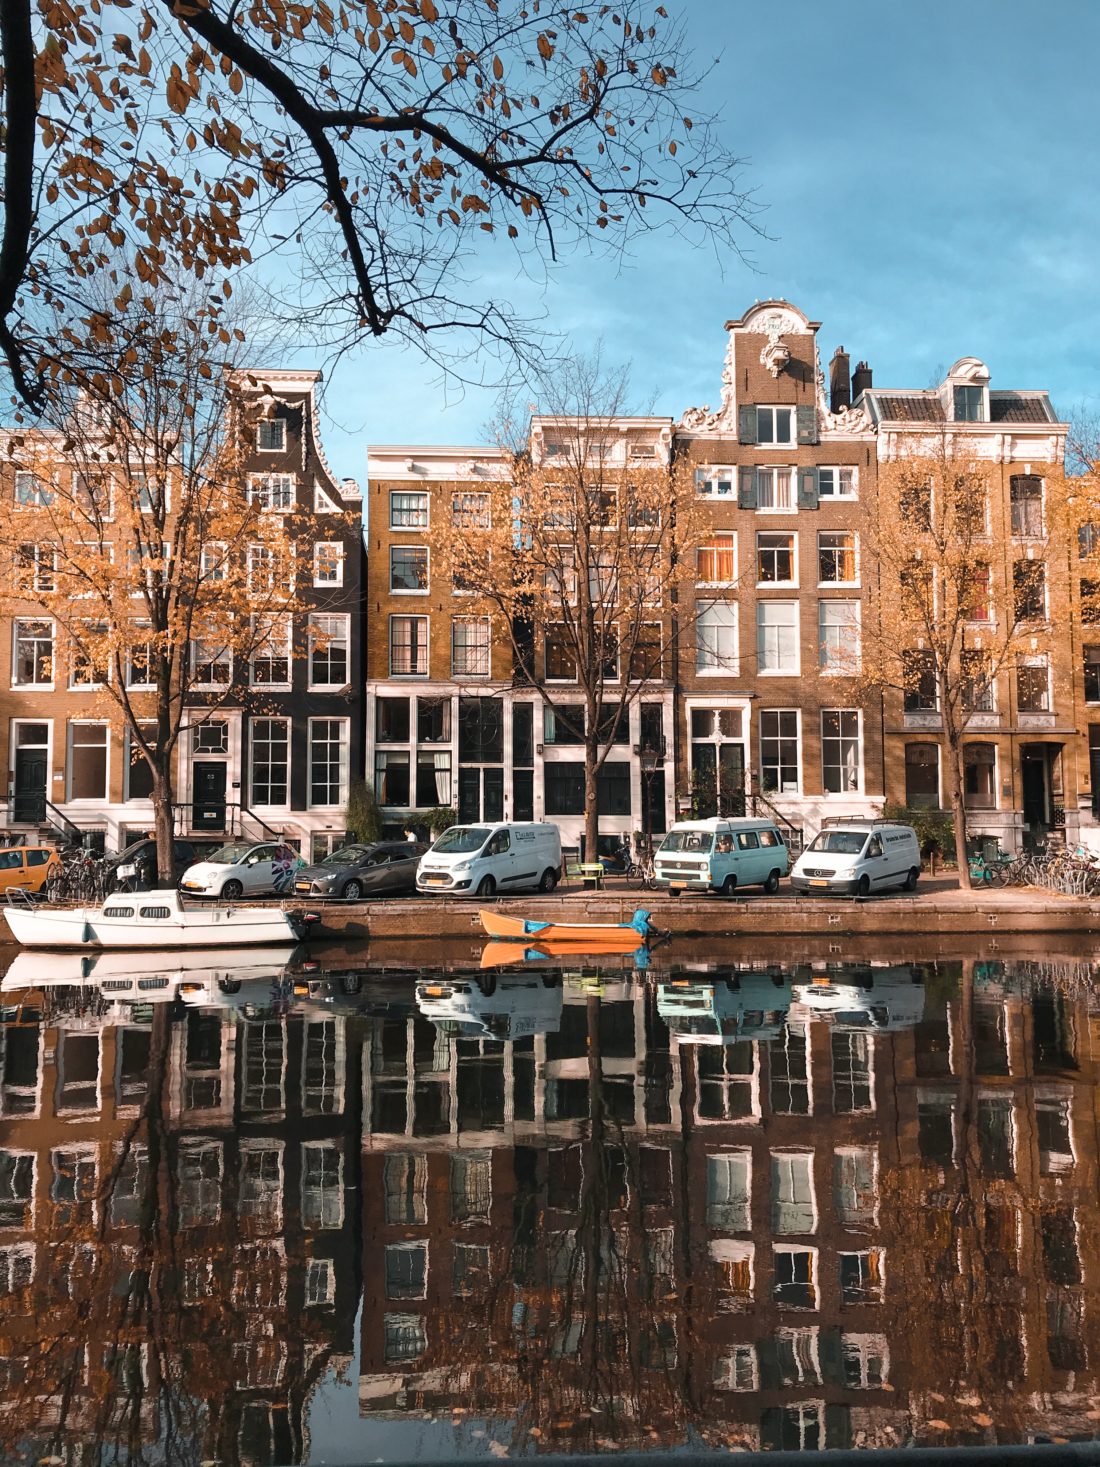 Explore Amsterdam in 8 hours layover